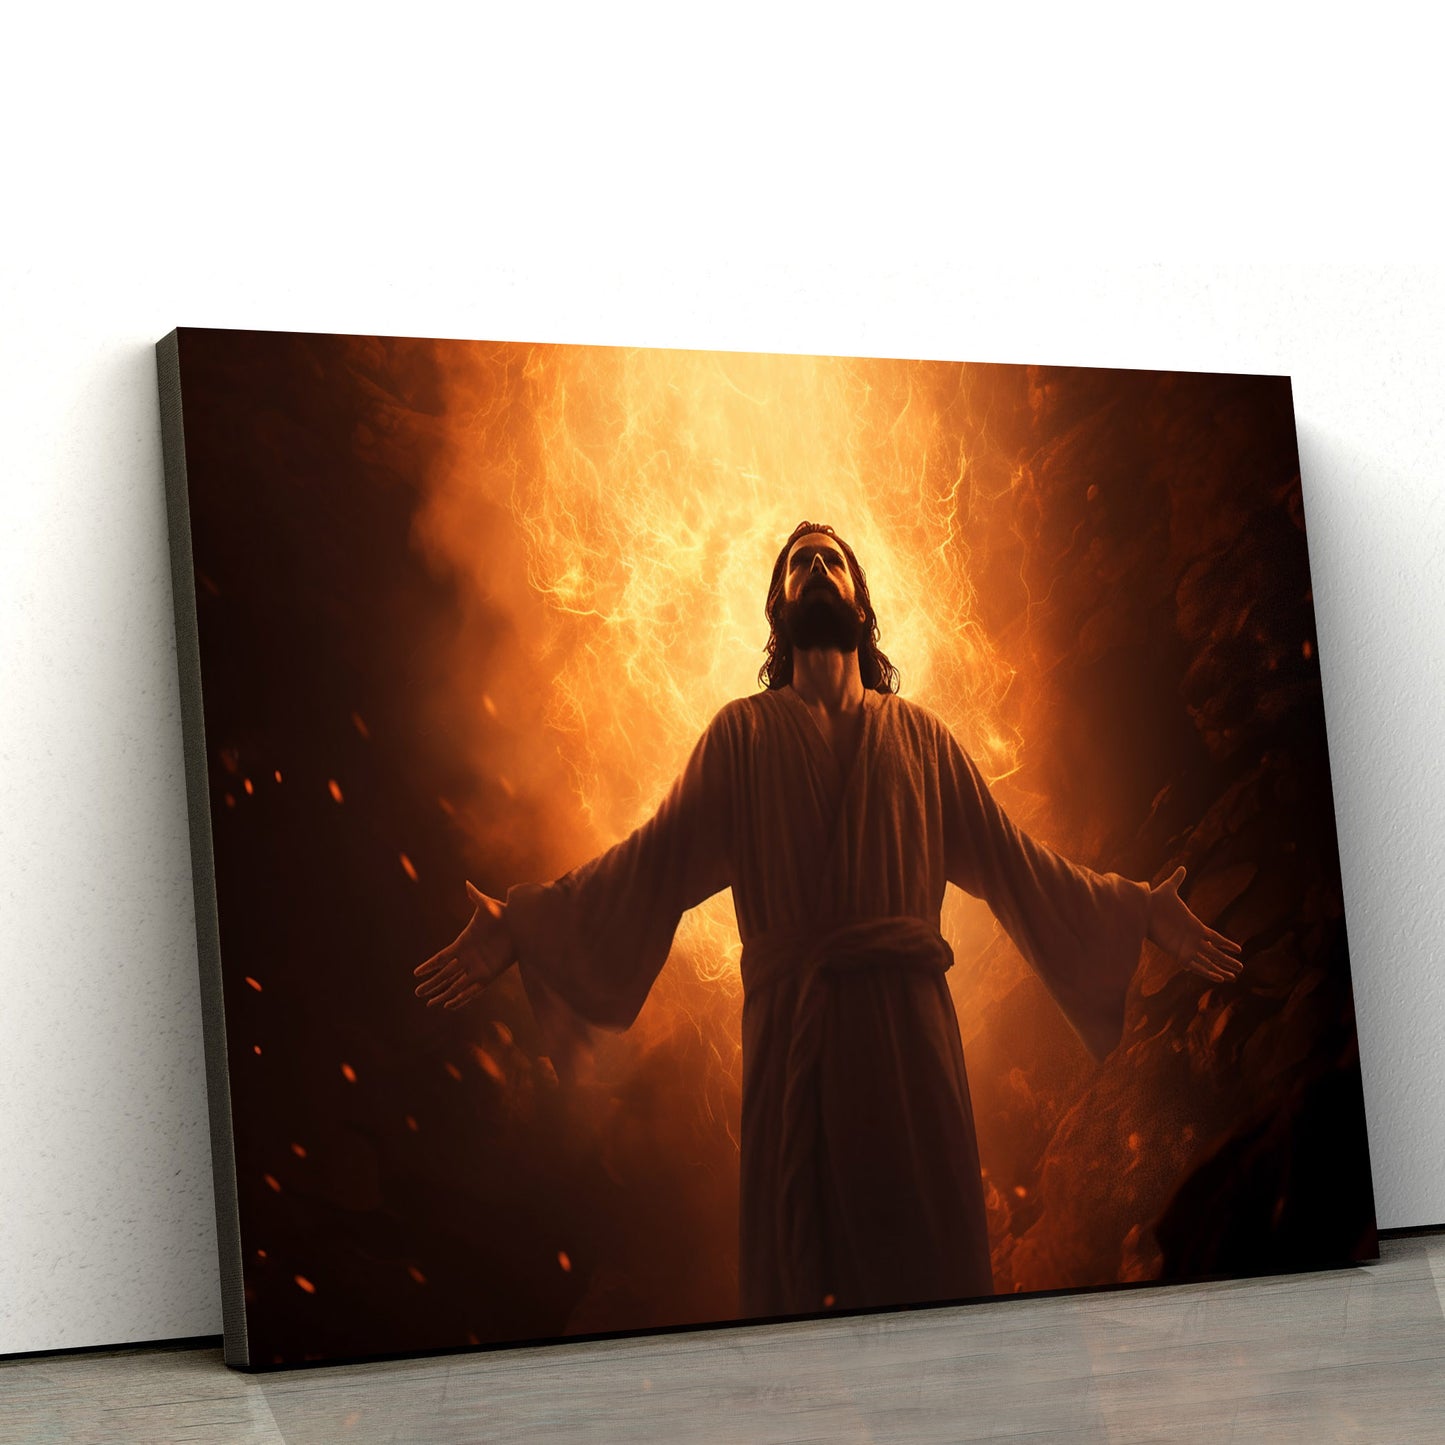 Jesus Reaching Towards A Bright Star Which Leads Him Into The Fiery Pit - Canvas Picture - Jesus Christ Canvas - Christian Wall Art